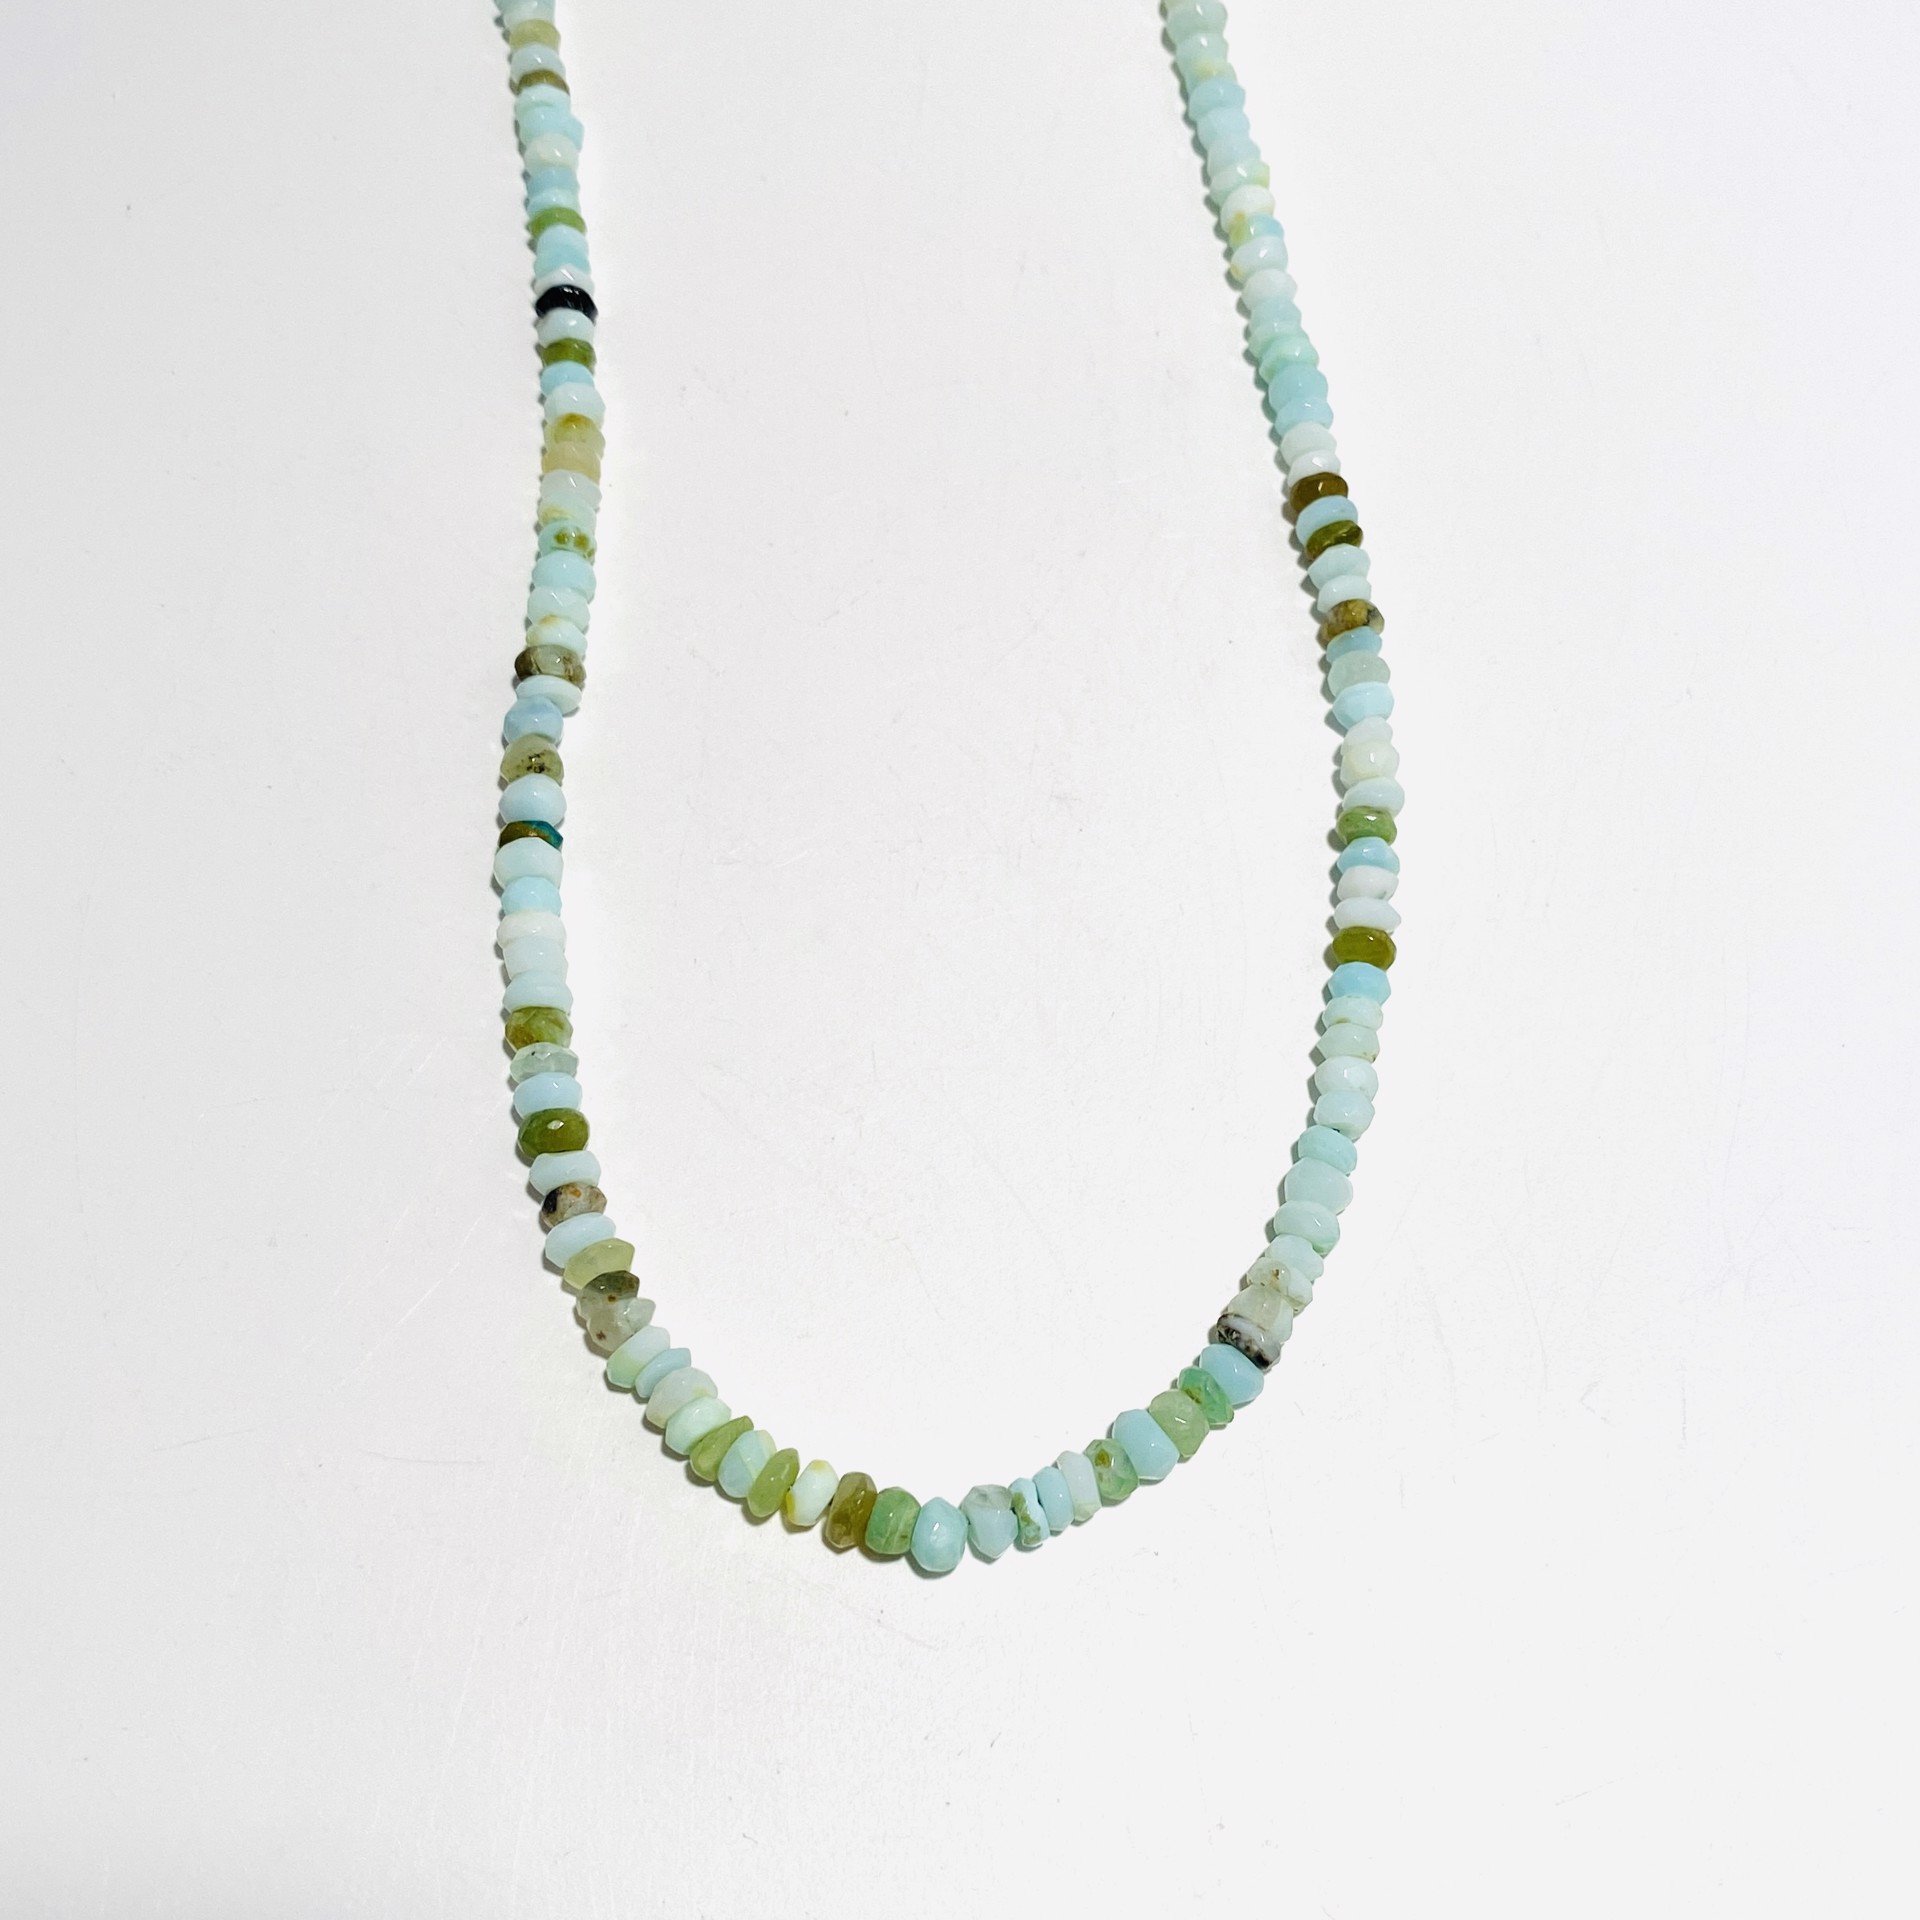 Faceted Peruvian Opal Strand Necklace by Nance Trueworthy